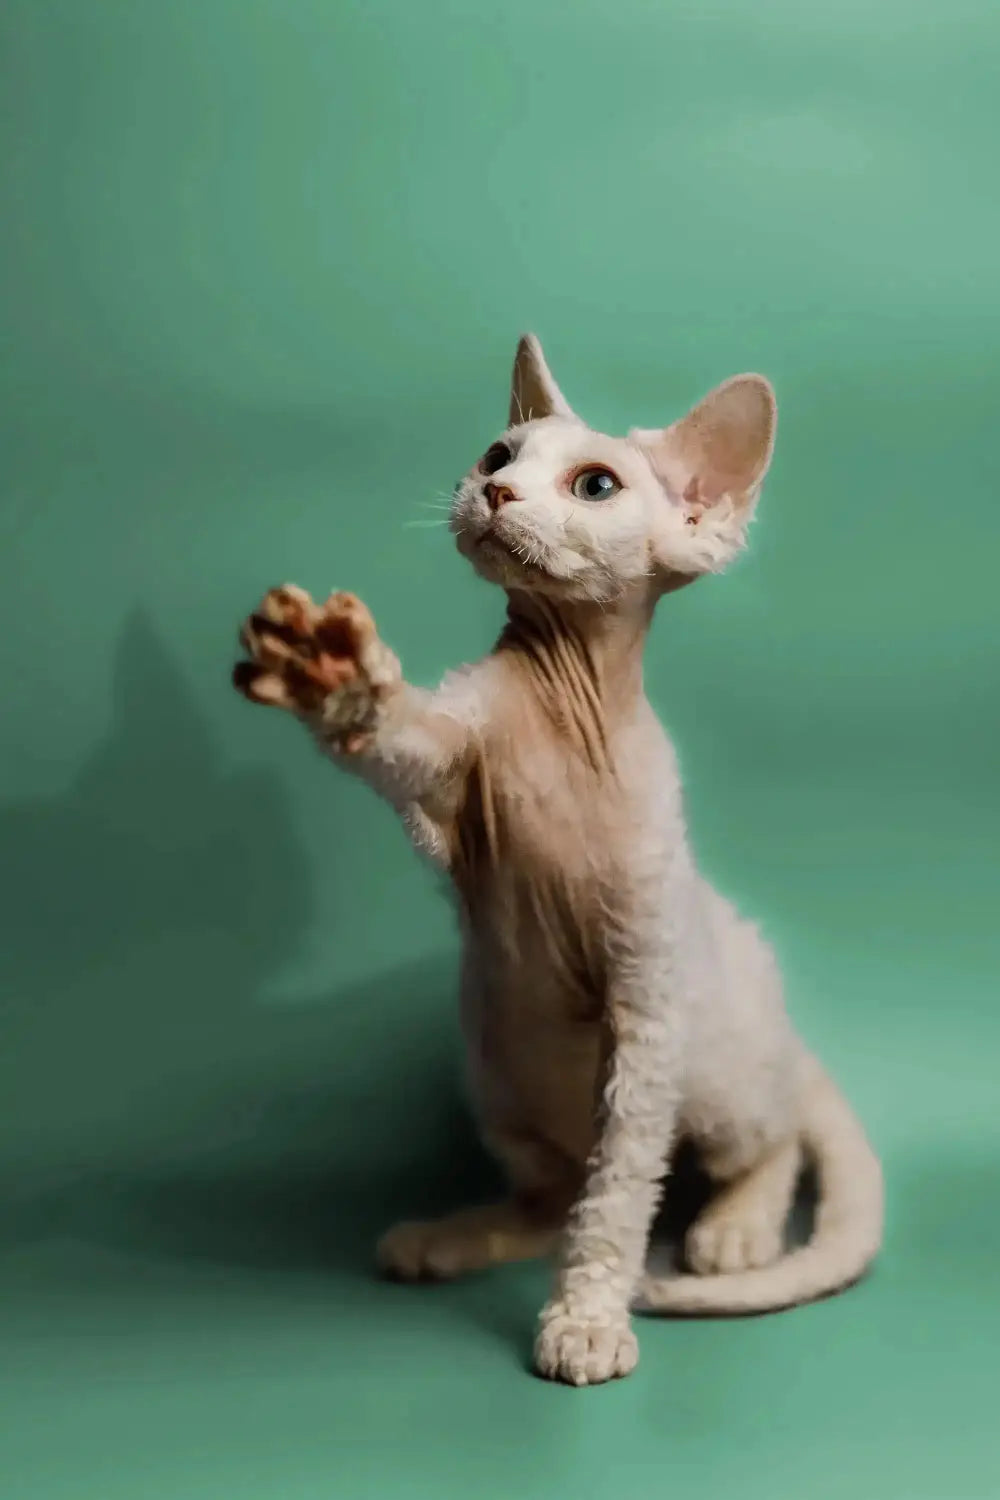 Devon Rex Cats Personality Traits: What to Expect